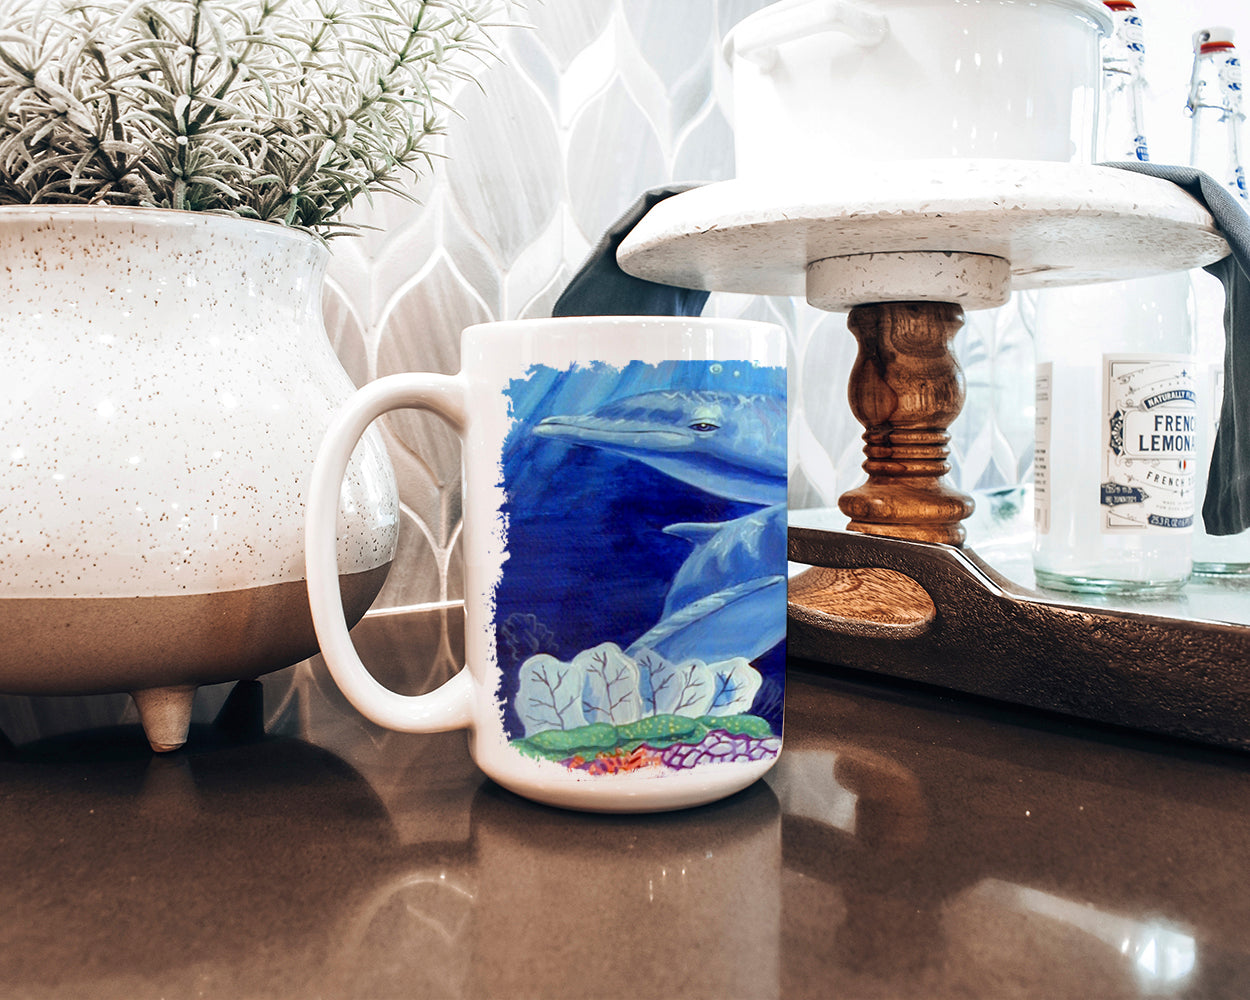 Dolphin under the sea Dishwasher Safe Microwavable Ceramic Coffee Mug 15 ounce 7080CM15  the-store.com.